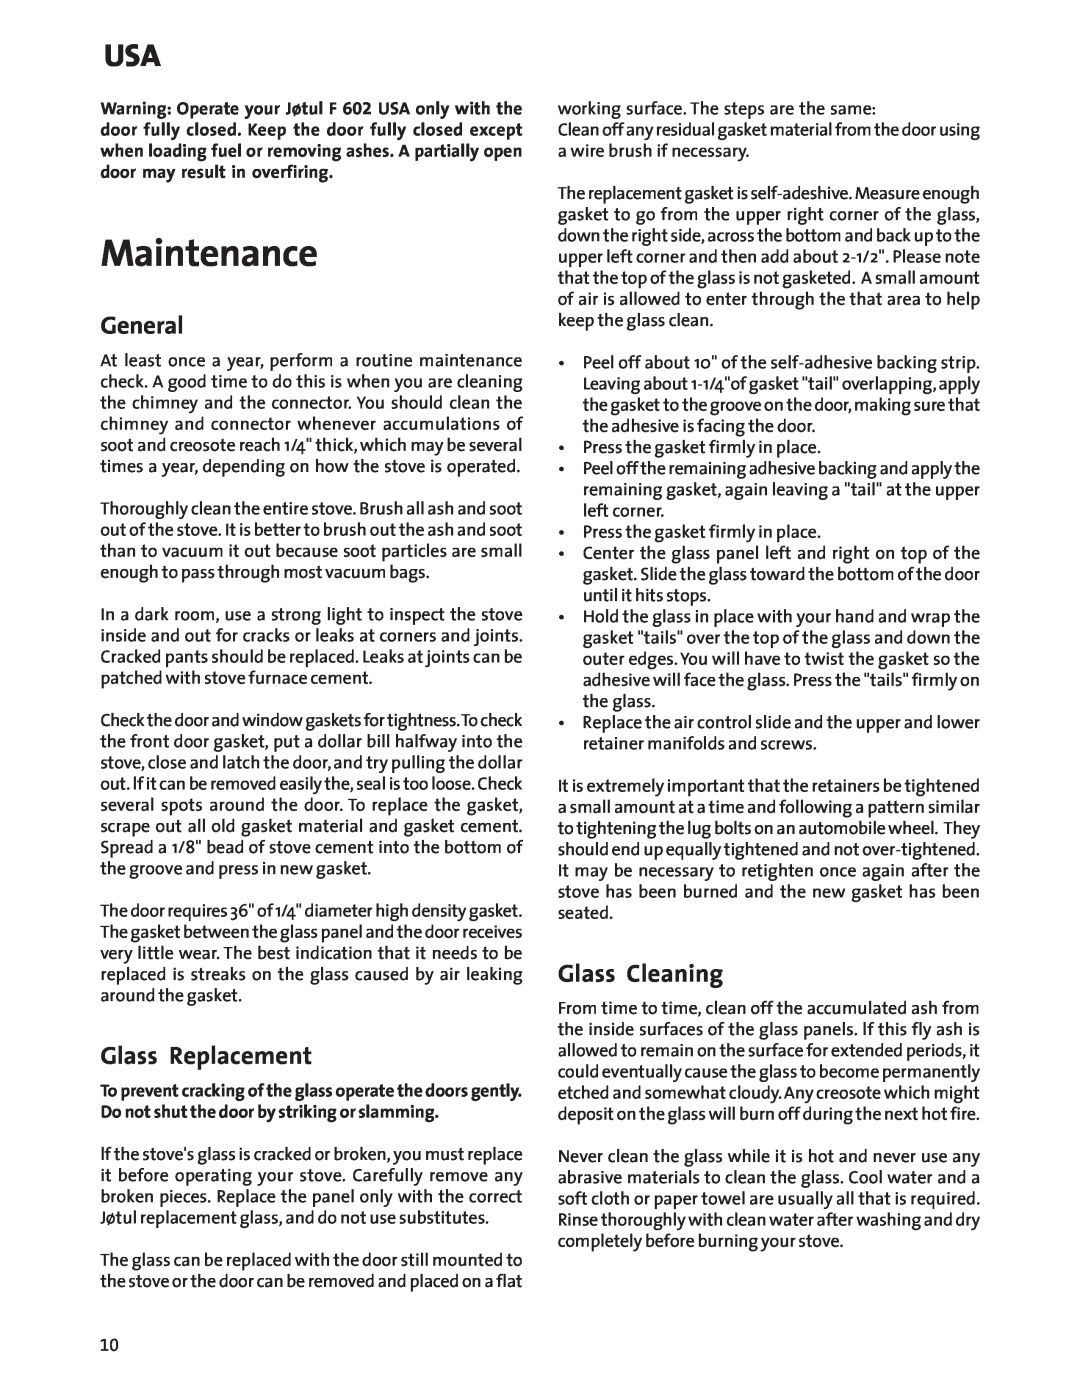 Jotul Wood Stove manual Maintenance, General, Glass Replacement, Glass Cleaning 